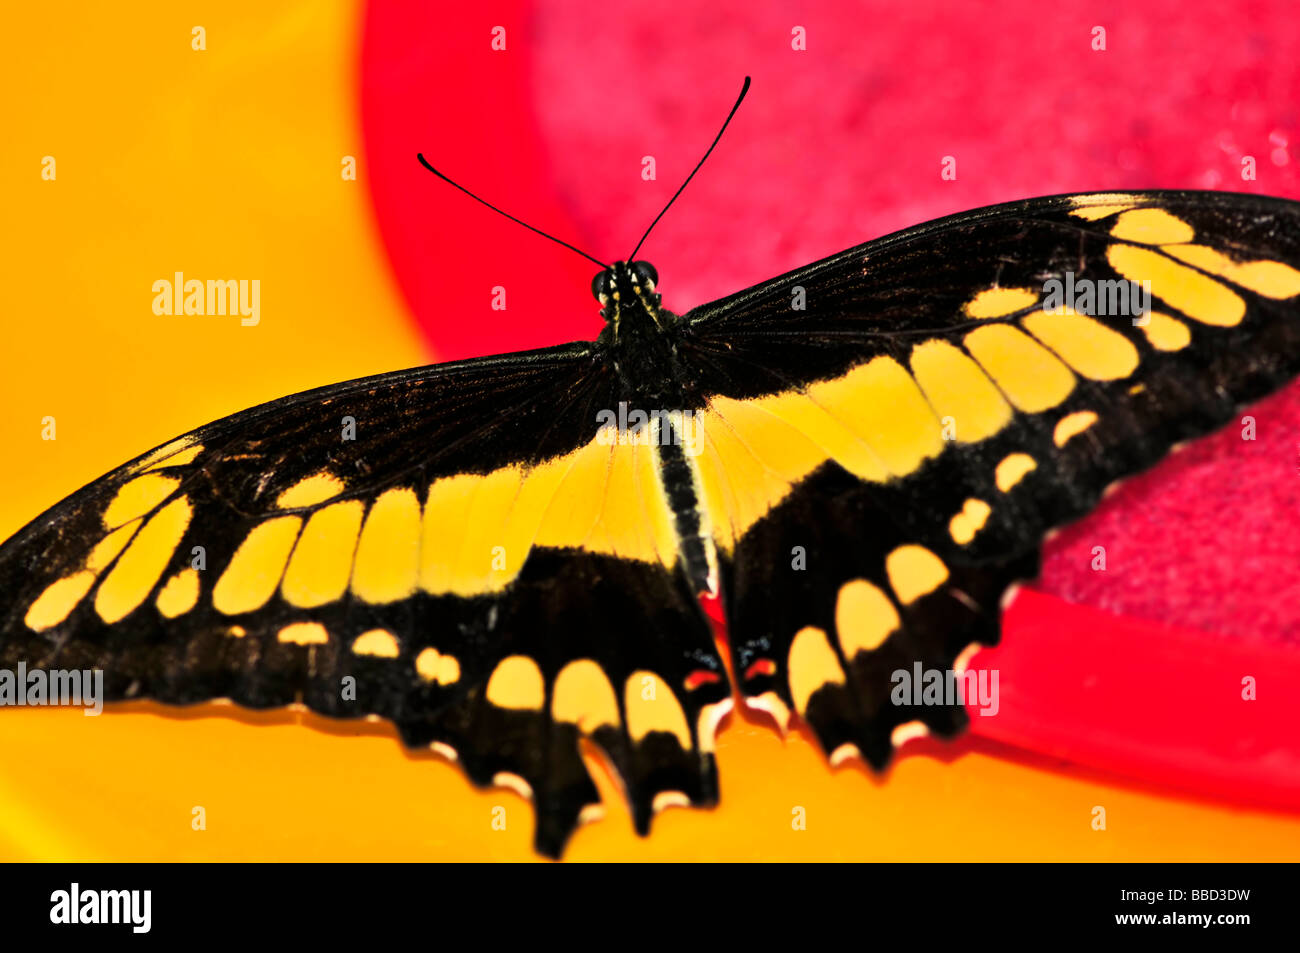 Giant swallowtail butterfly with open wings and yellow markings Stock Photo